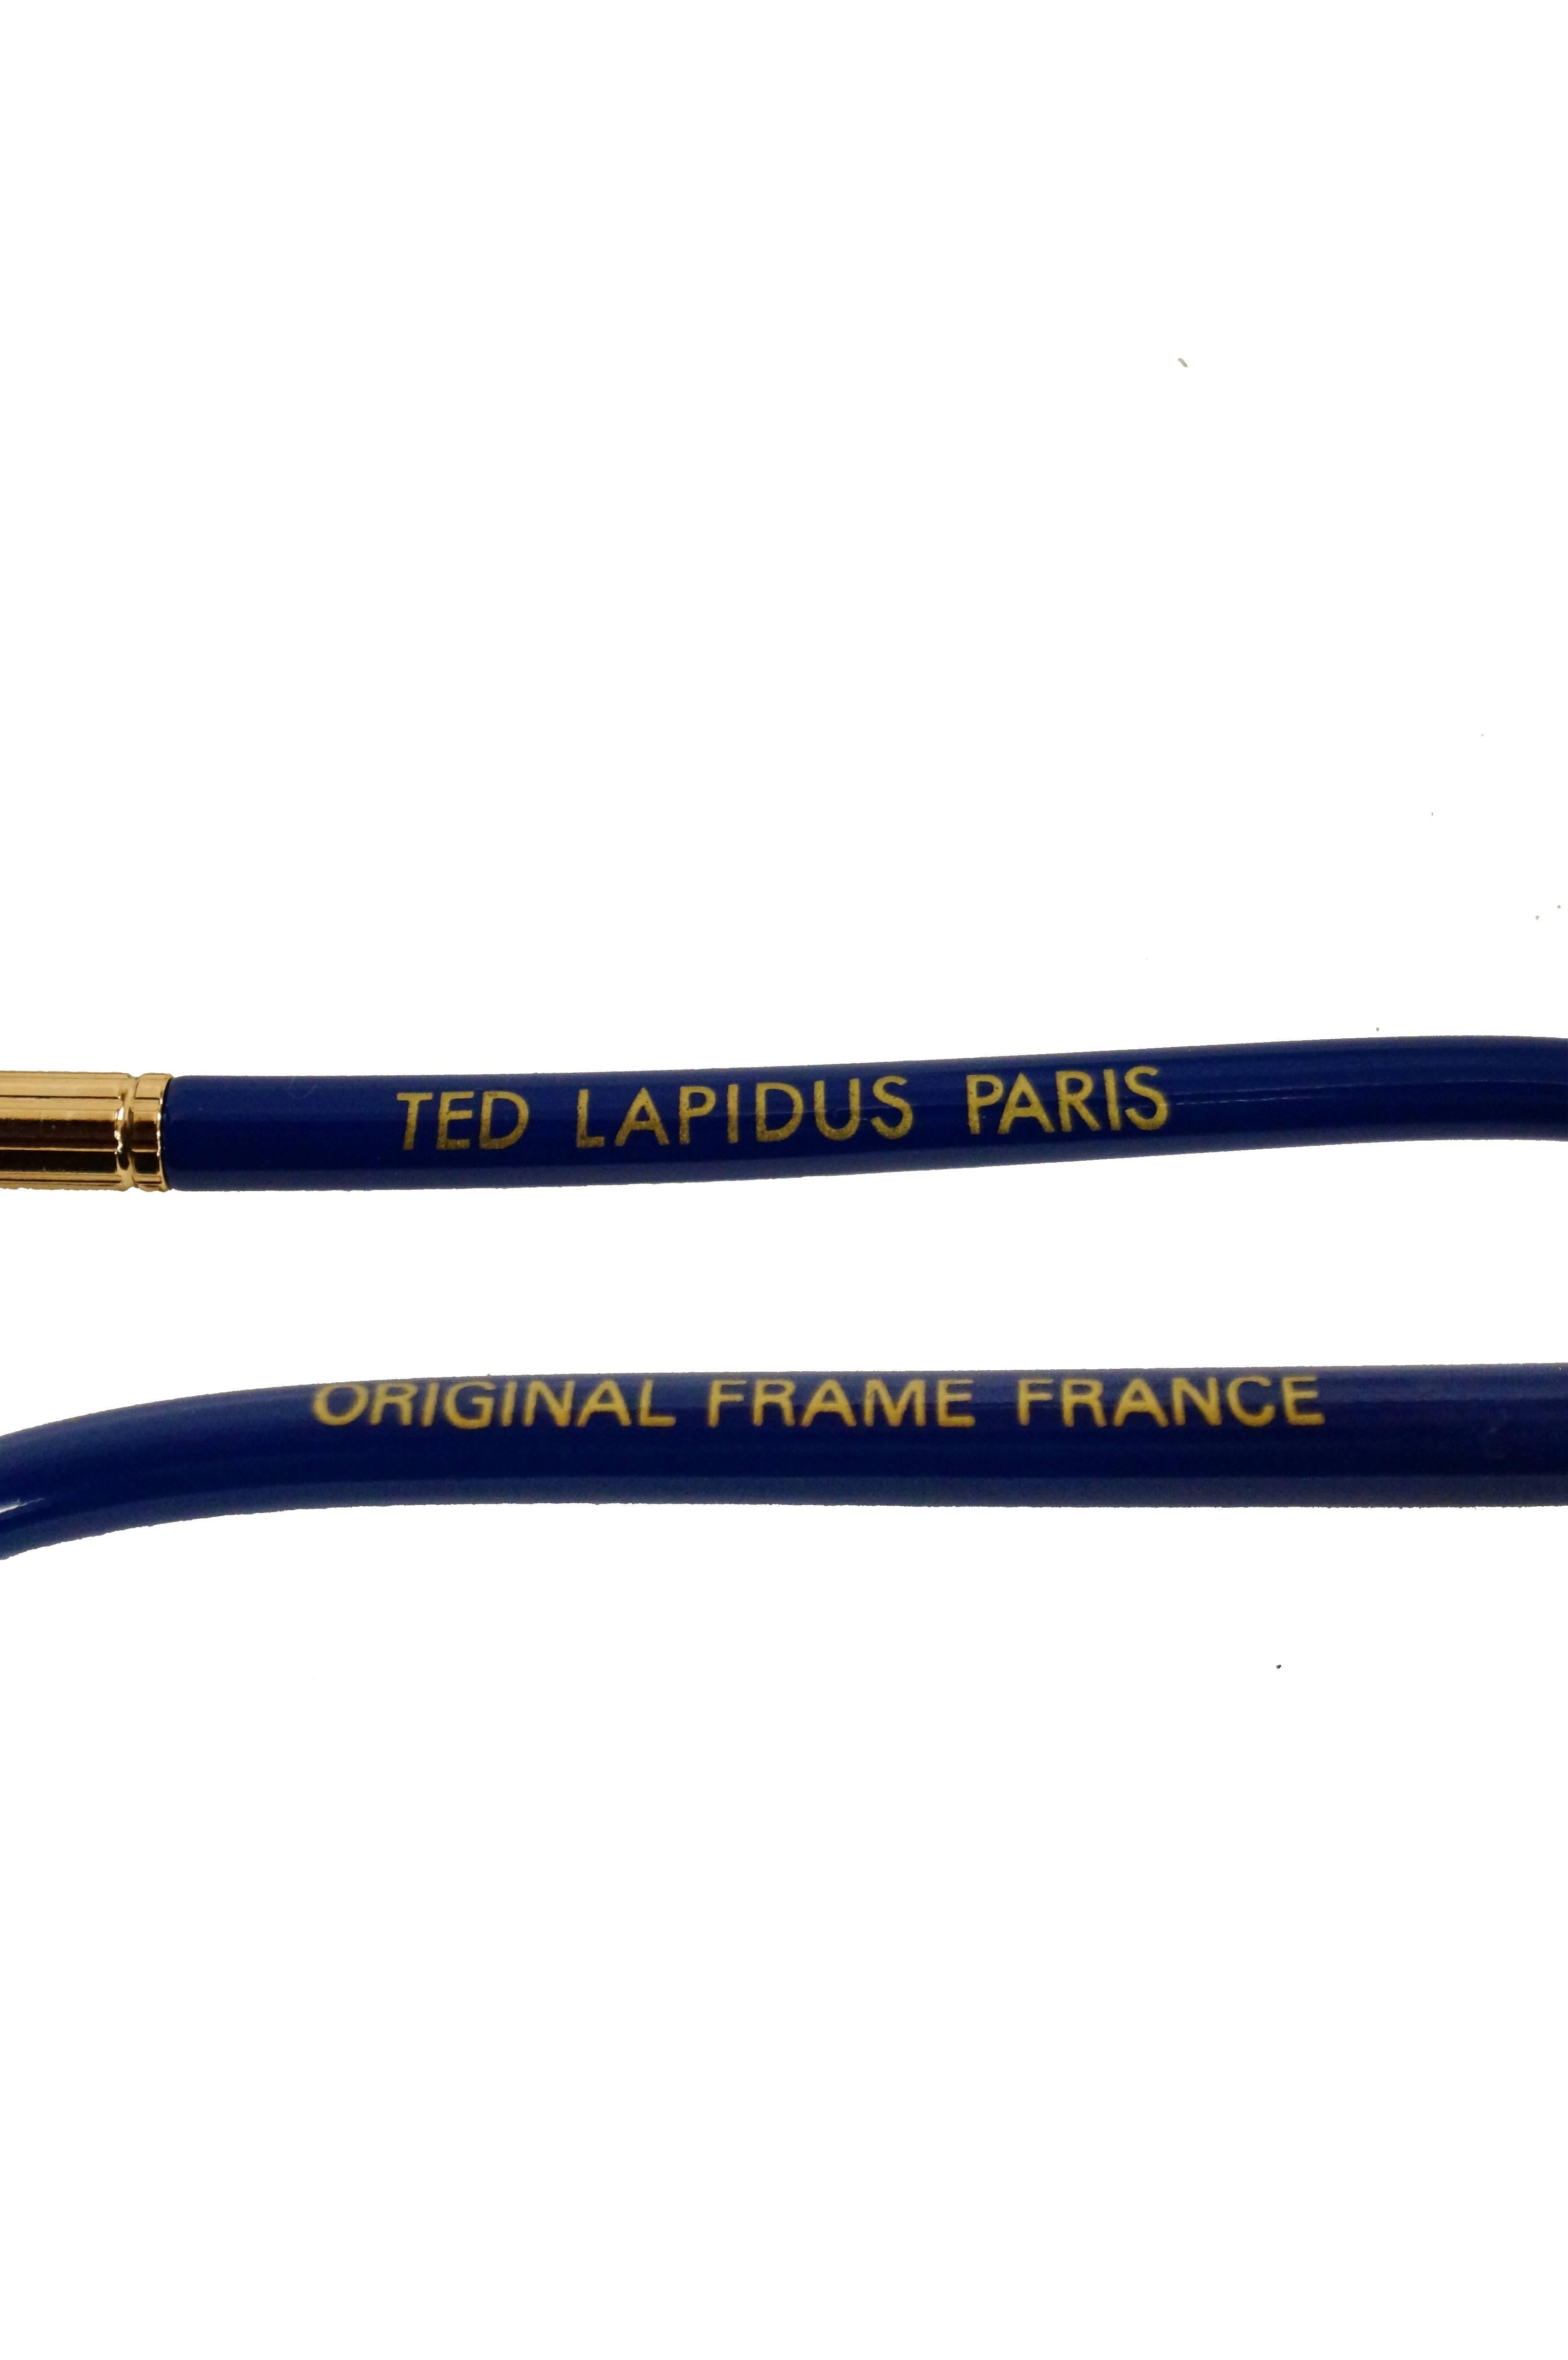 Gray Ted Lapidus Sunglasses Framed in Royal Blue and Gold, 1970s  